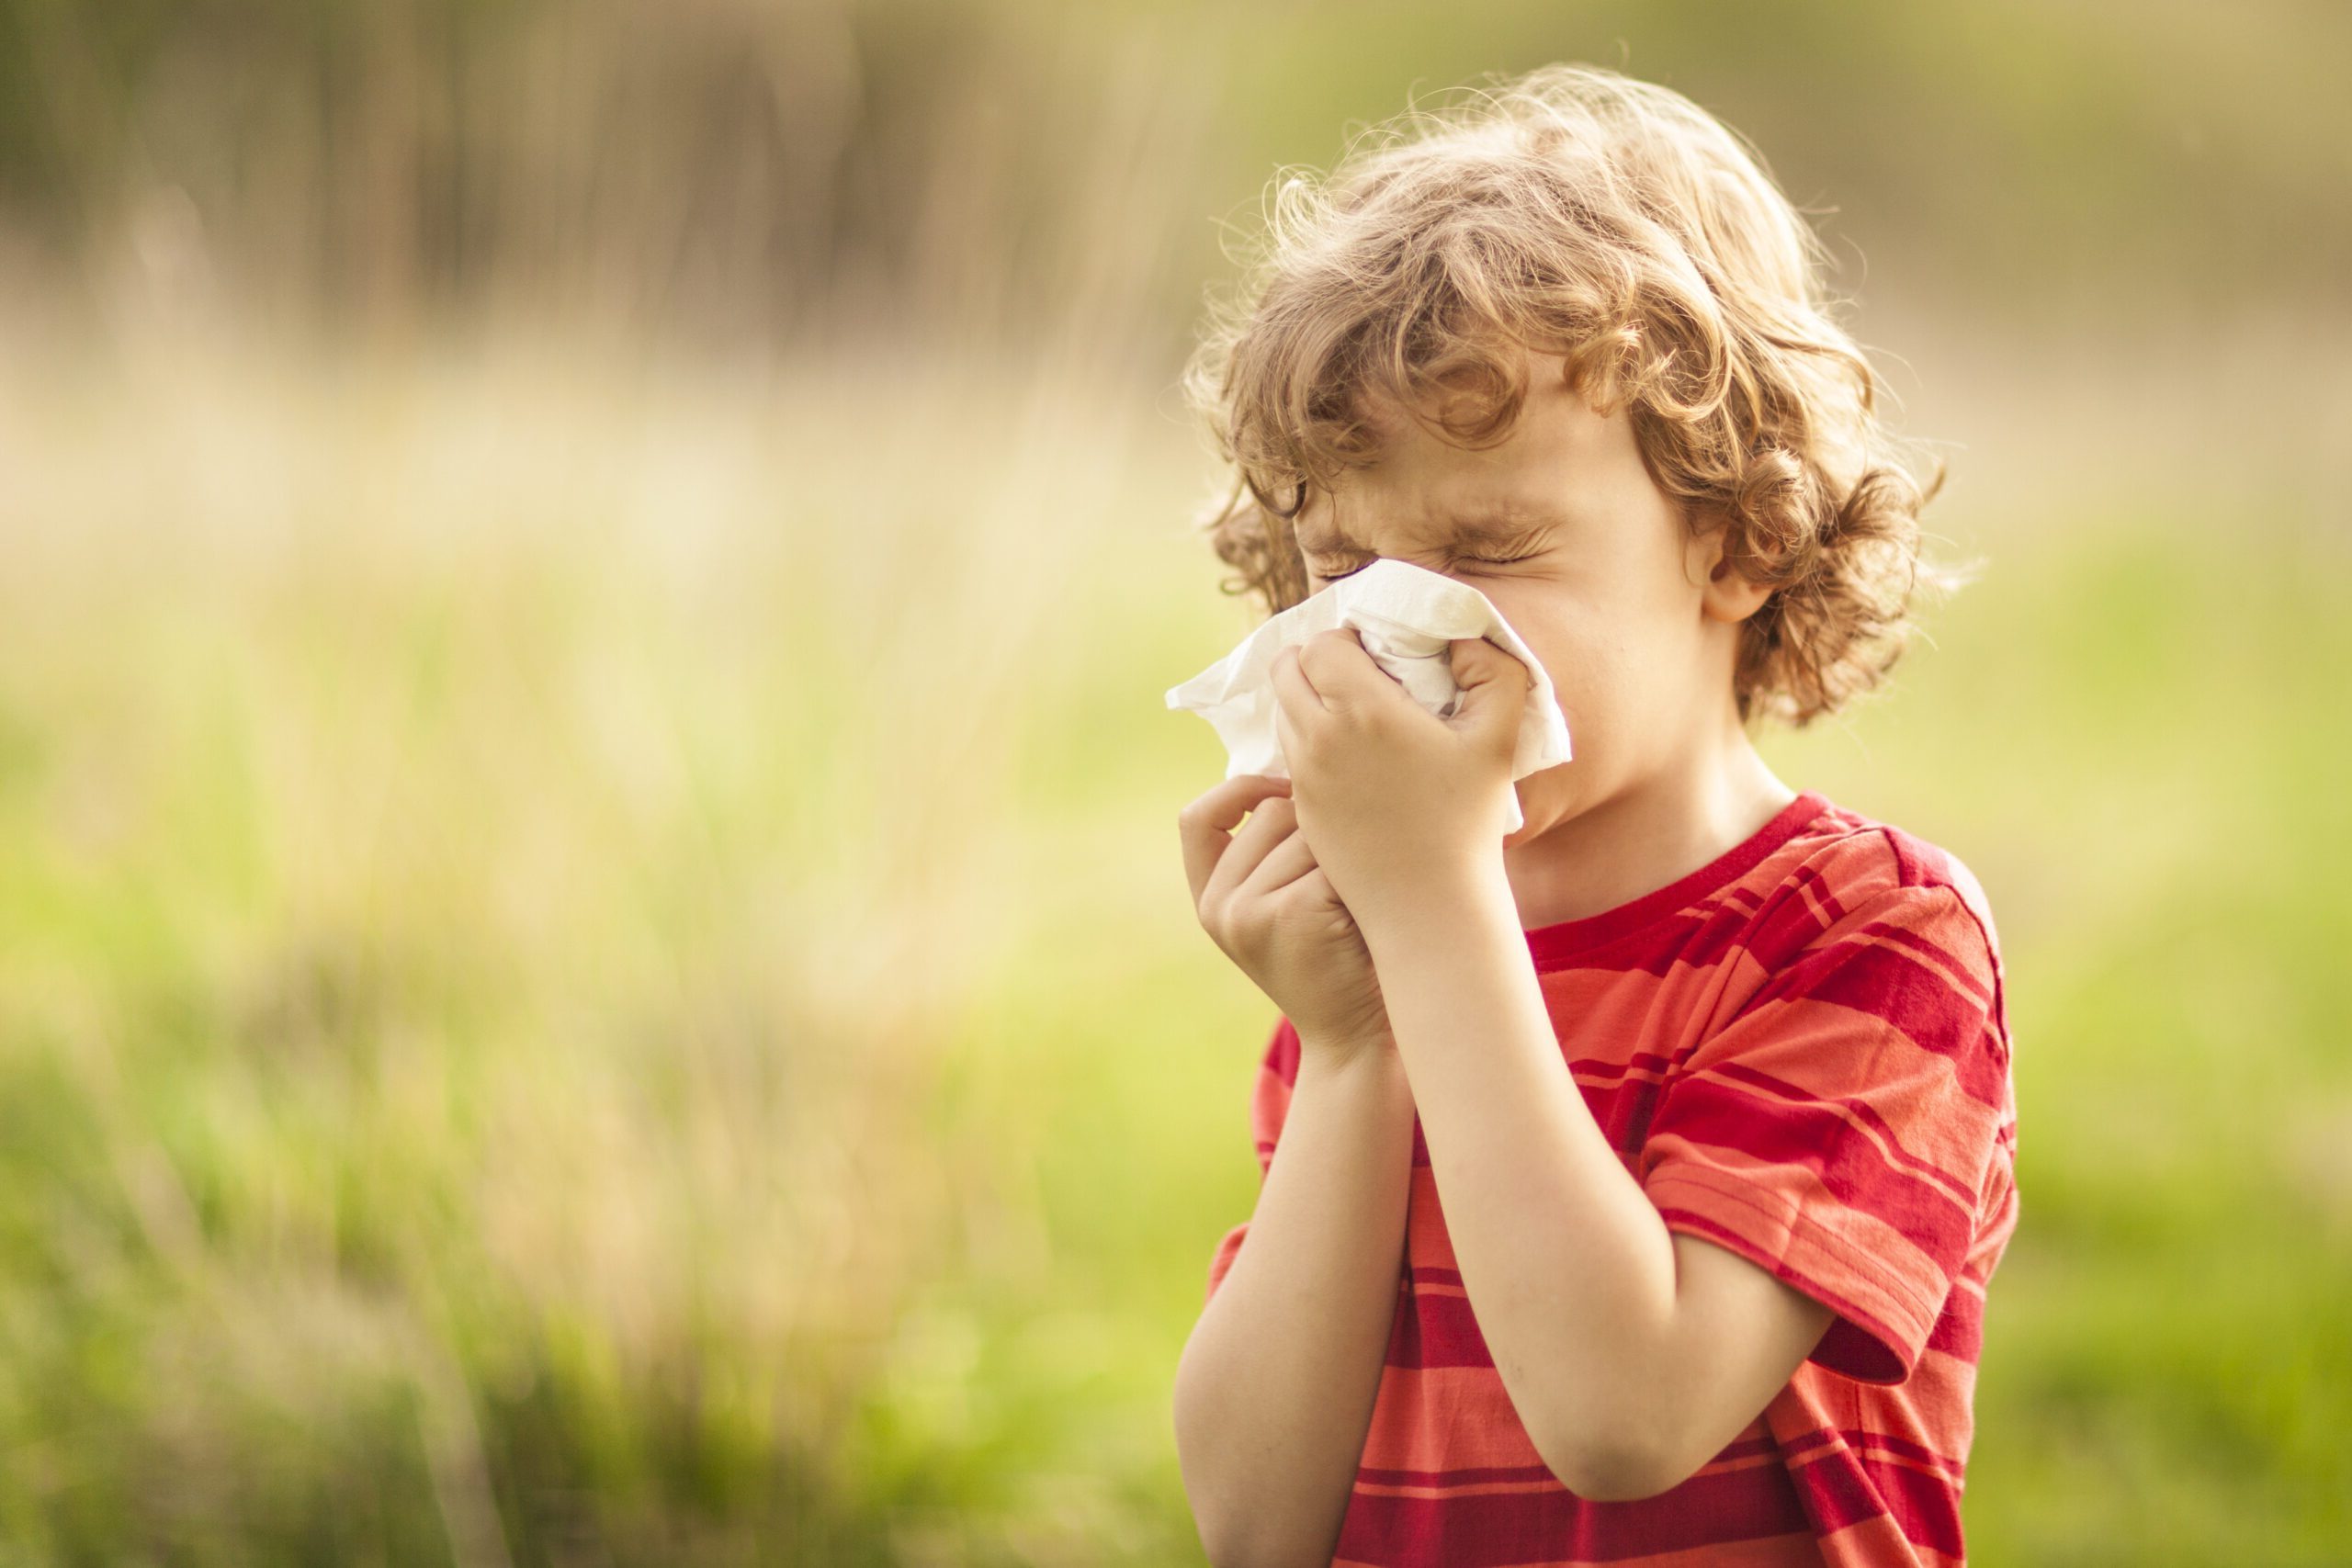 Little blond boy sneezing due to allergy related problems, on a sunny day outdoors. He is holding a handkerchief in his hands, looking away. Copy space available.